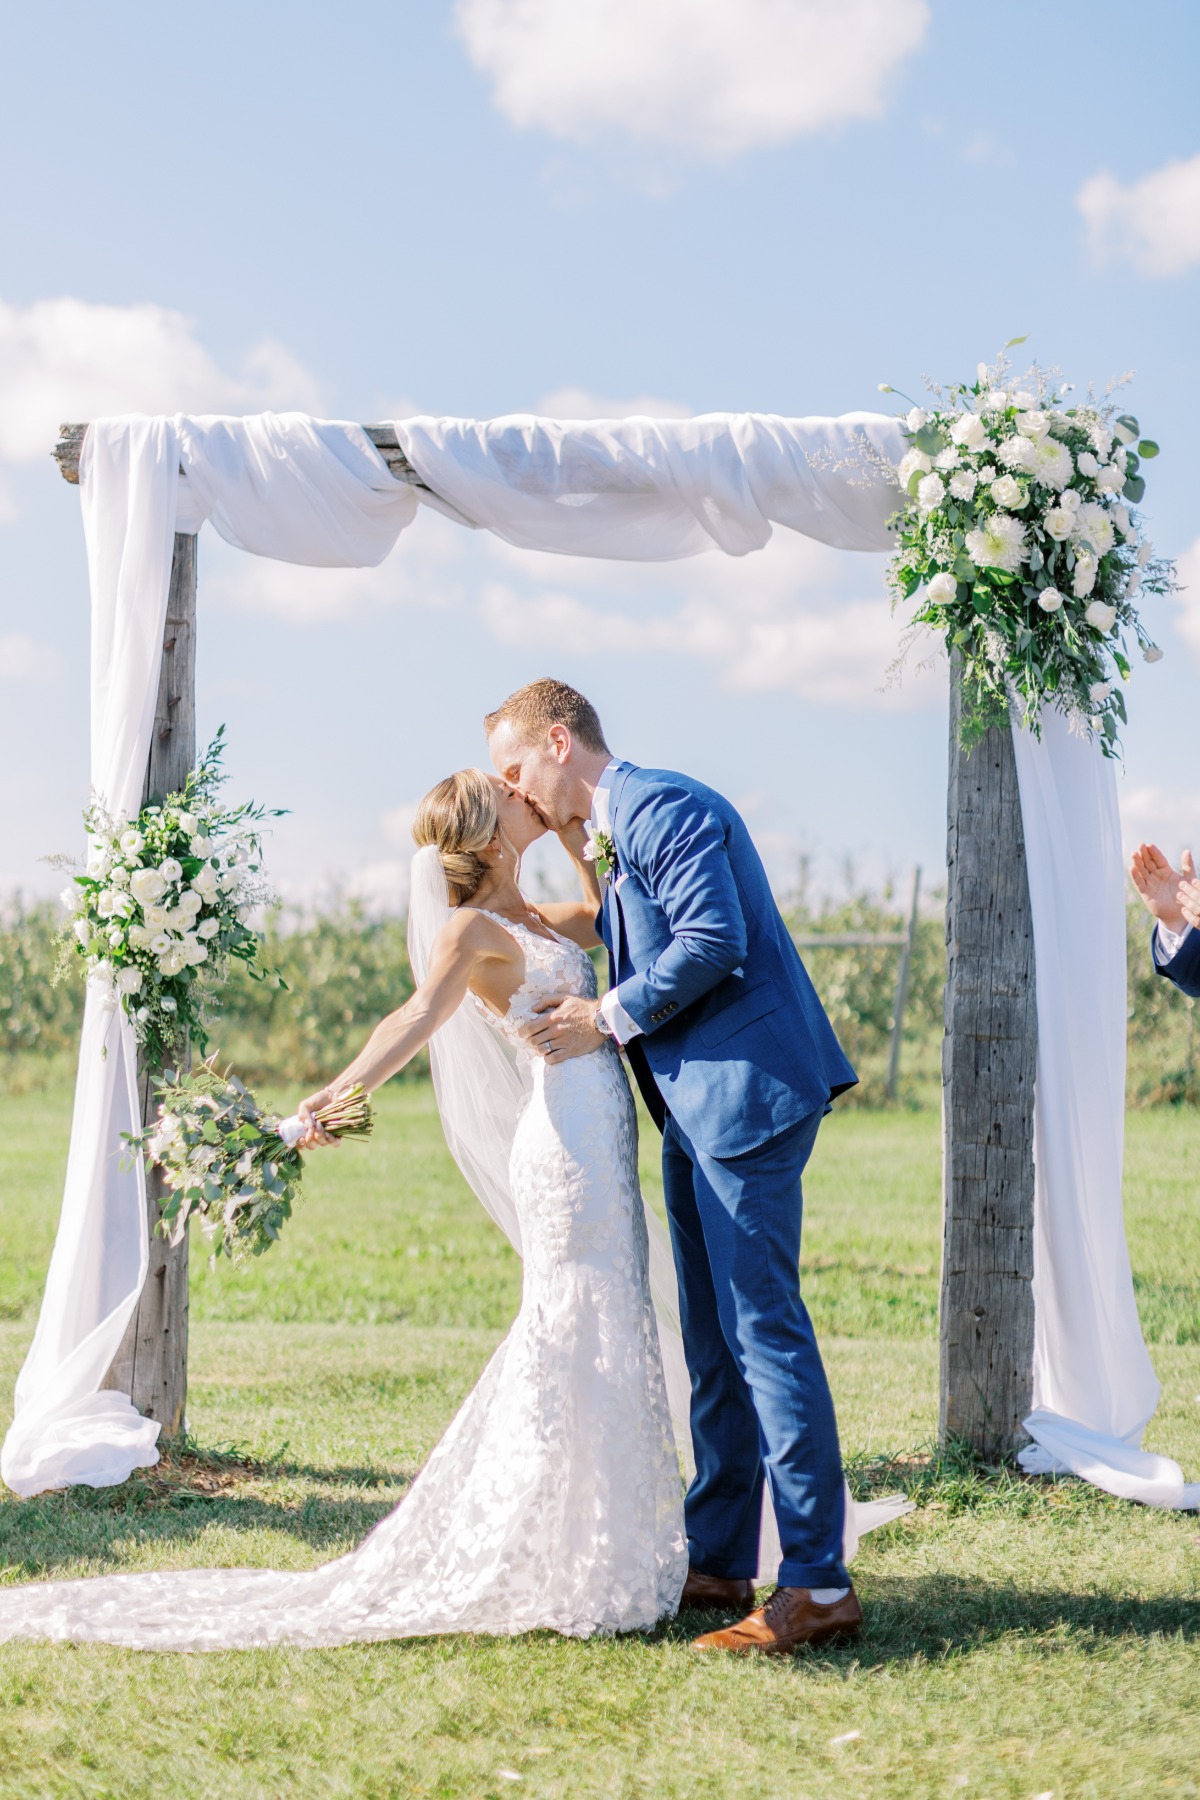 simple wedding ceremony floral arches